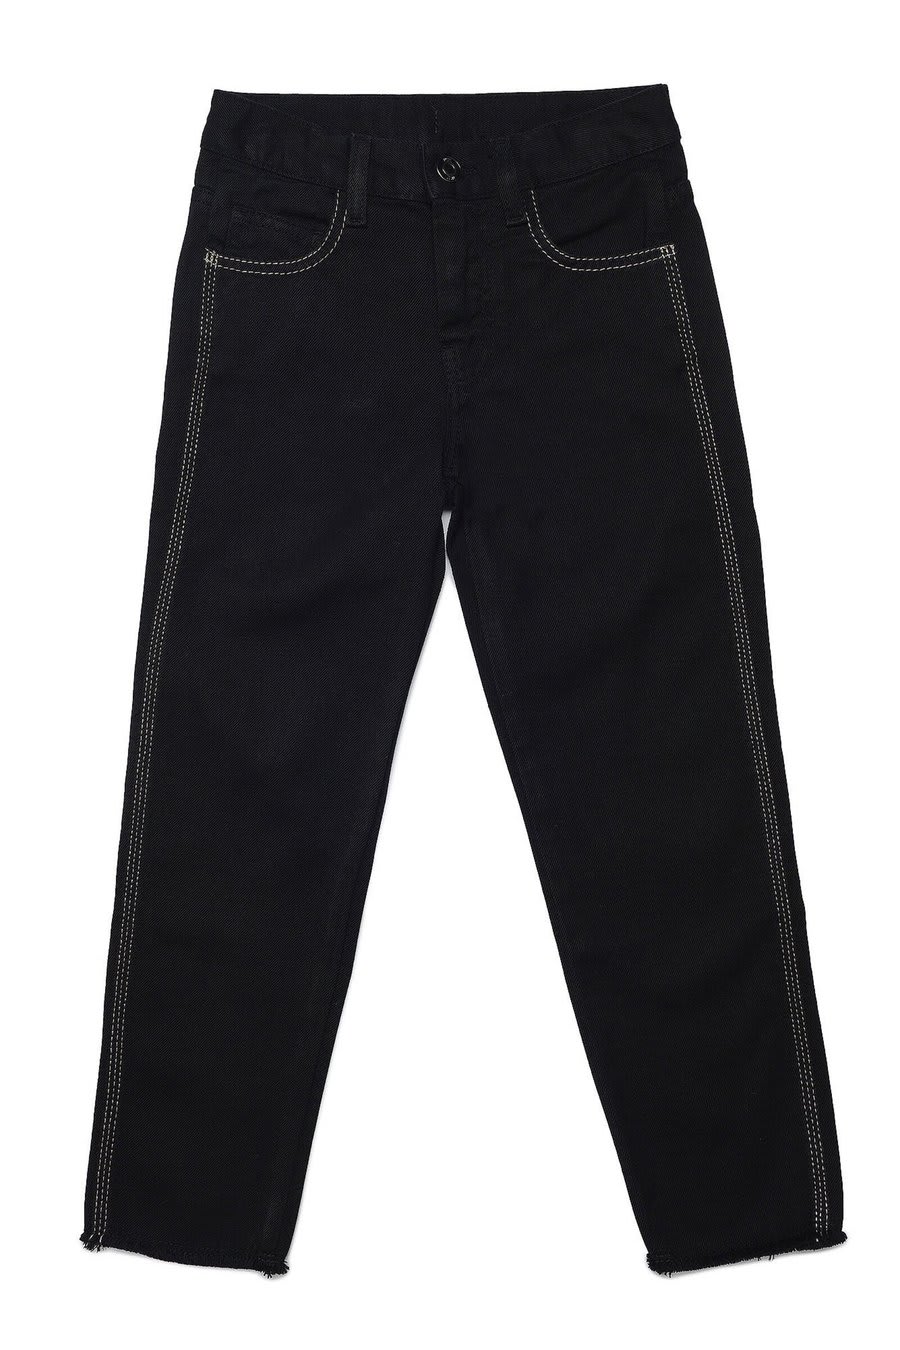 N.21 Sports Trousers With Embroidery